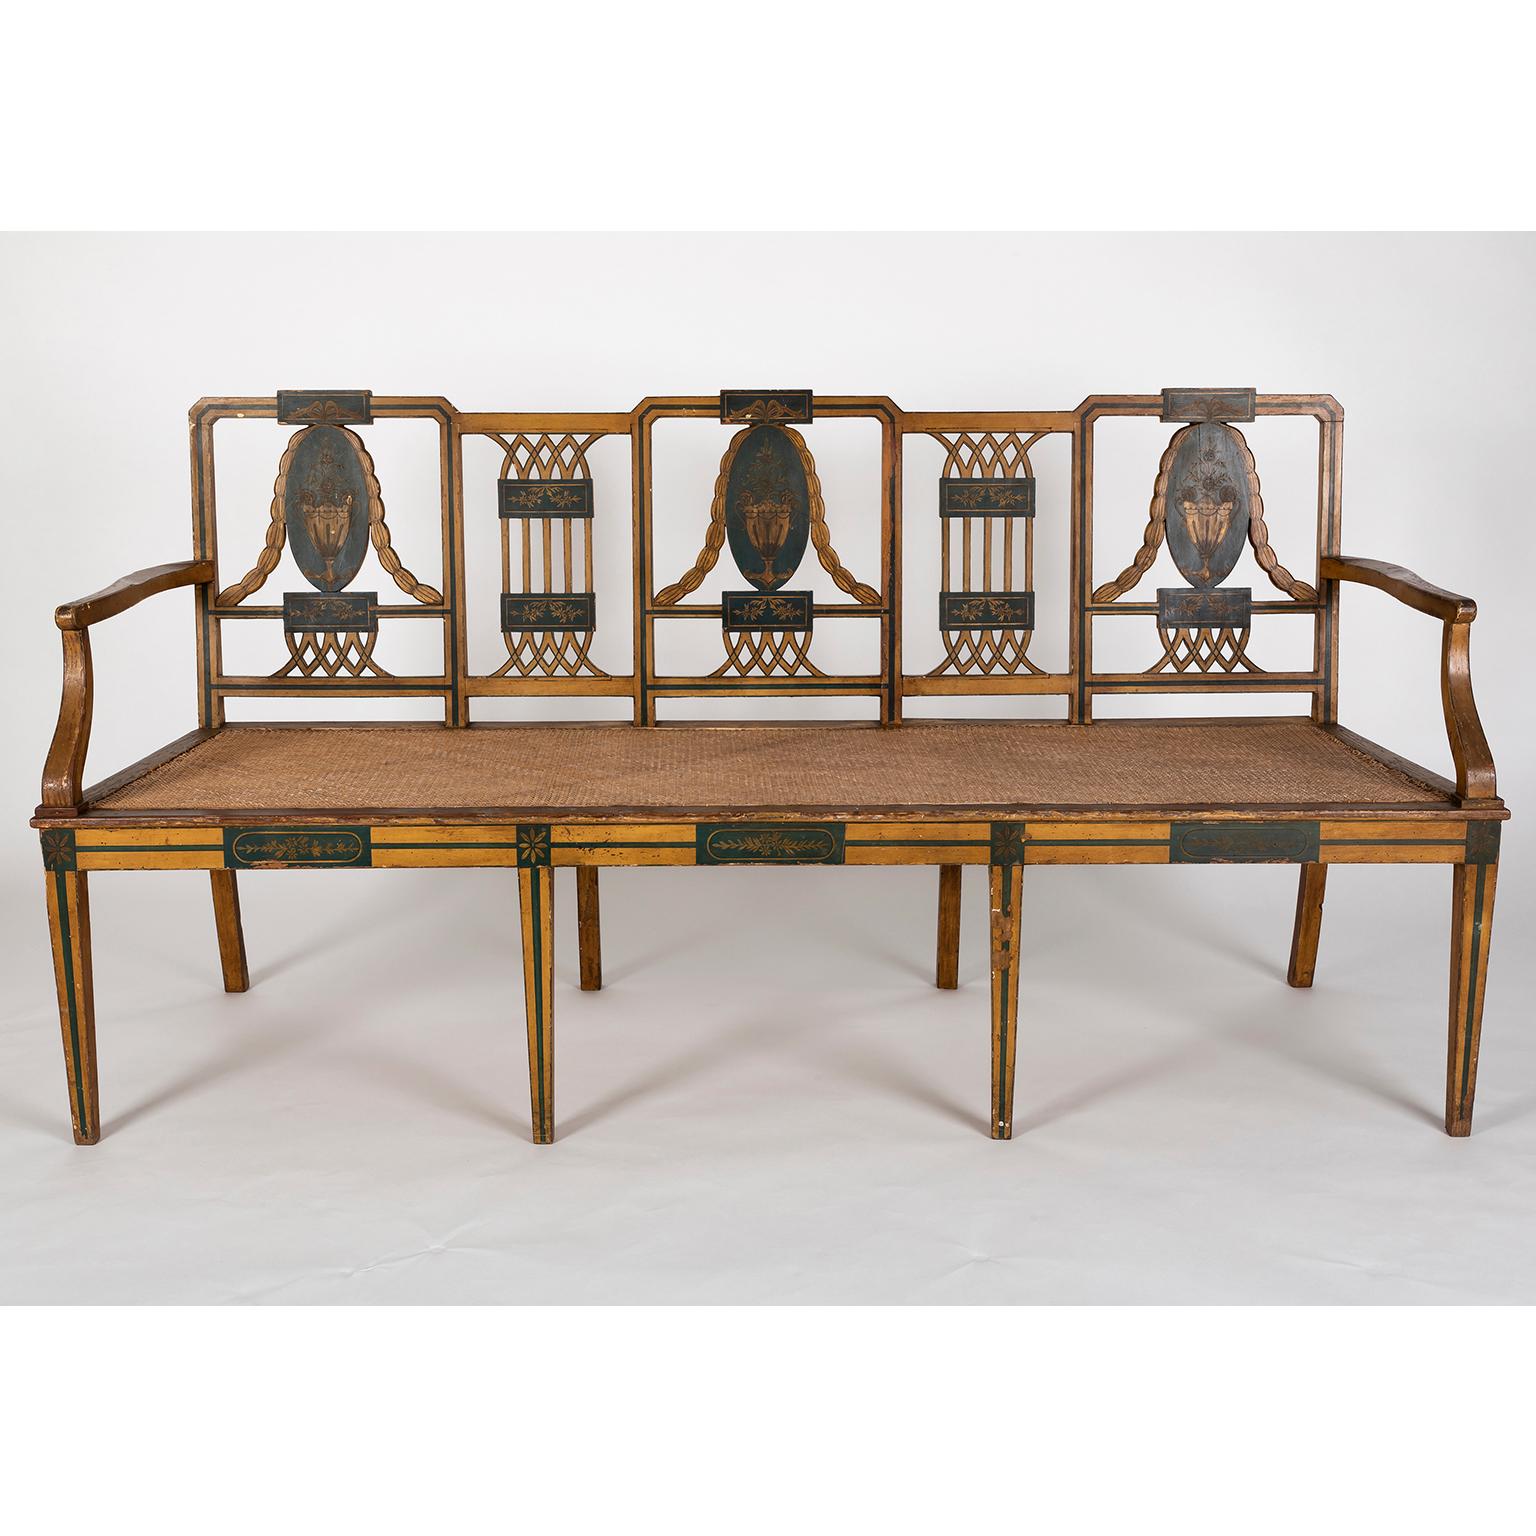 19th Century Portuguese Dona Maria Style Room Set, Painted Wood and Canned Seats For Sale